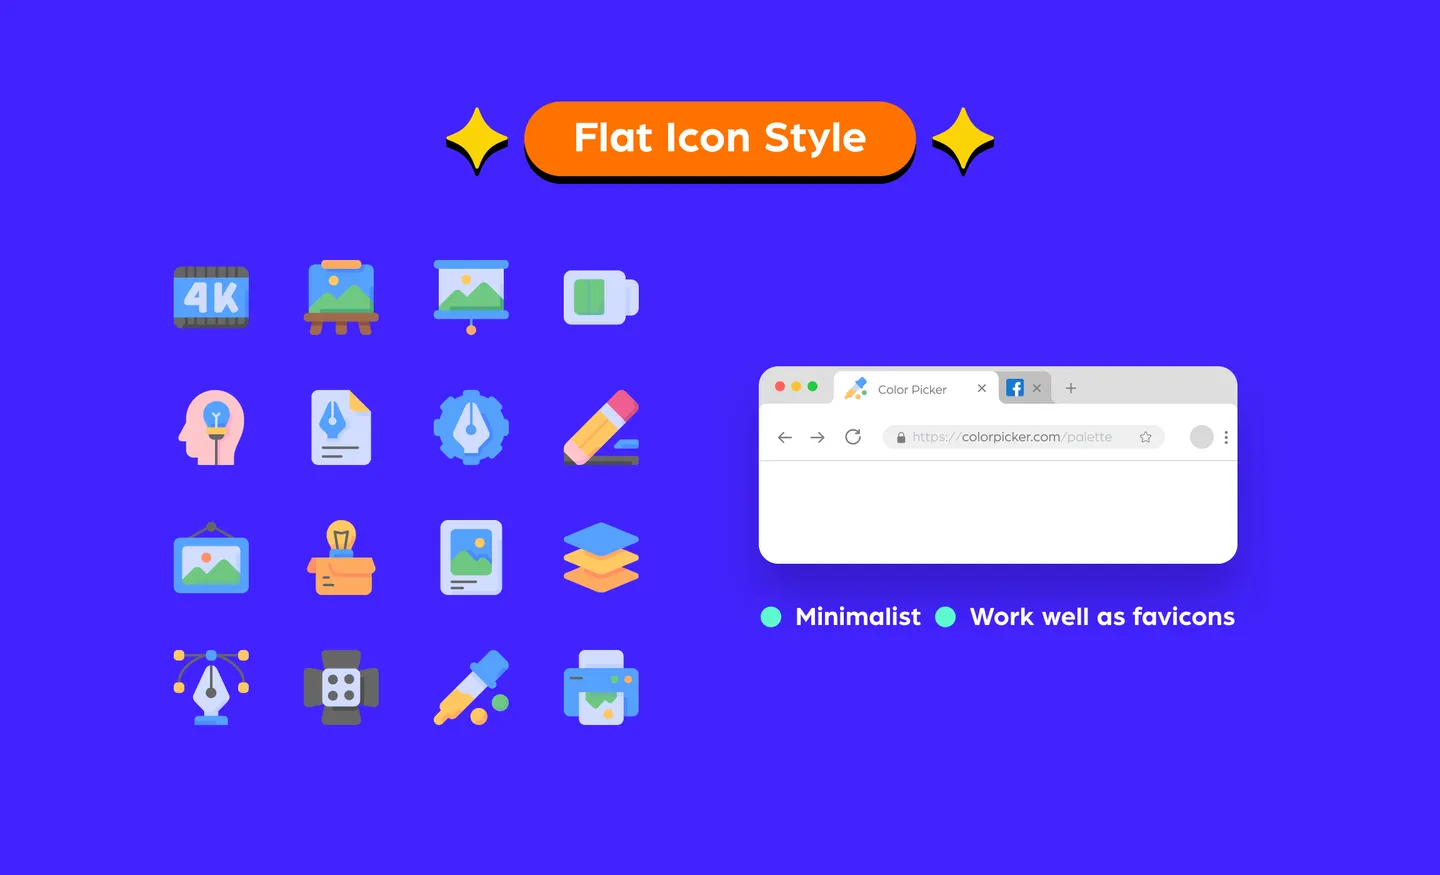 A guide to the flat icon style